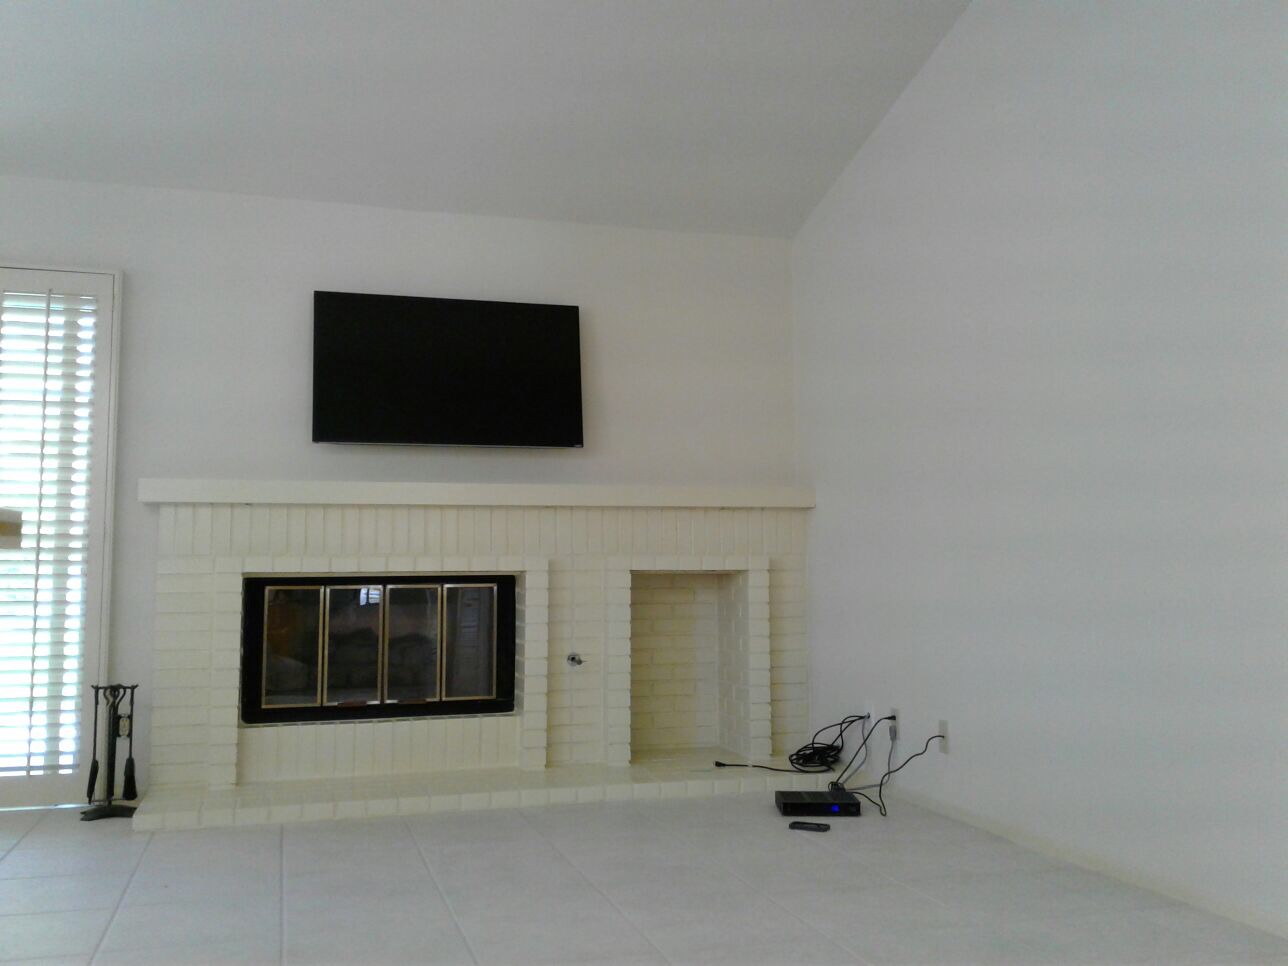 CertaPro Painters in 4S Ranch, CA your Interior living room painting experts